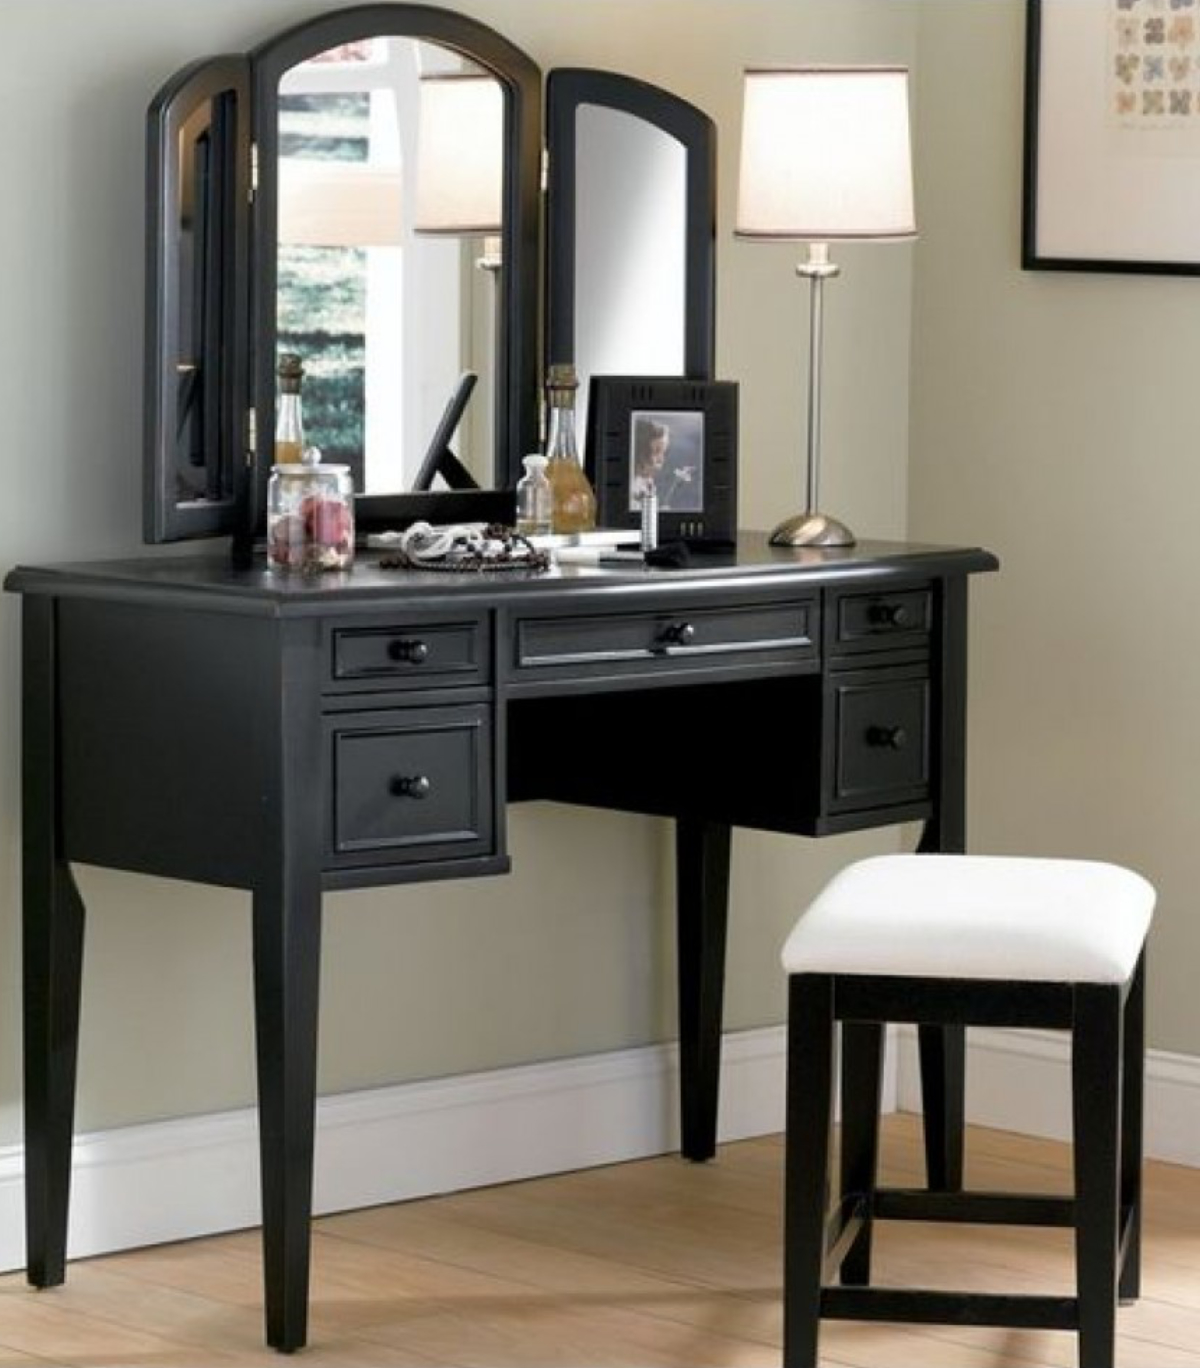 Motero black dressing mirror (Available on order)